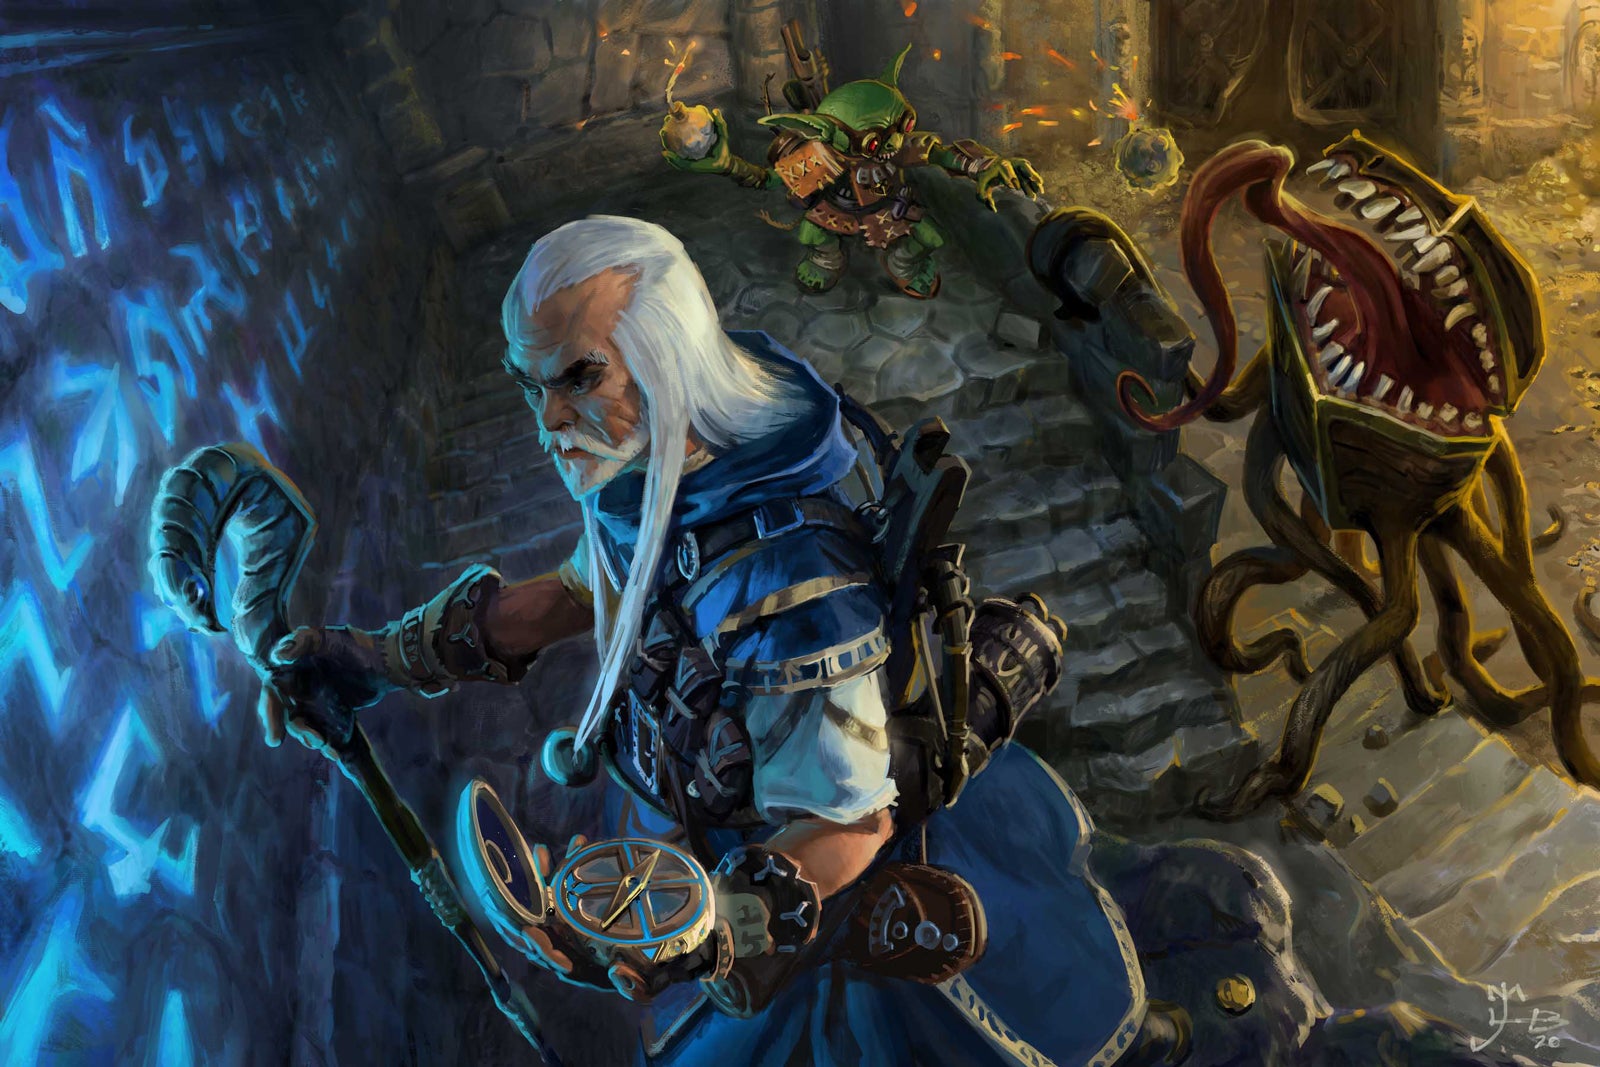 The iconic wizard pores over a wall of glowing runes in a dark dungeon. In the background, the iconic alchemist fights a mimic shaped like a treasure chest, but the wizard doesn’t seem to notice